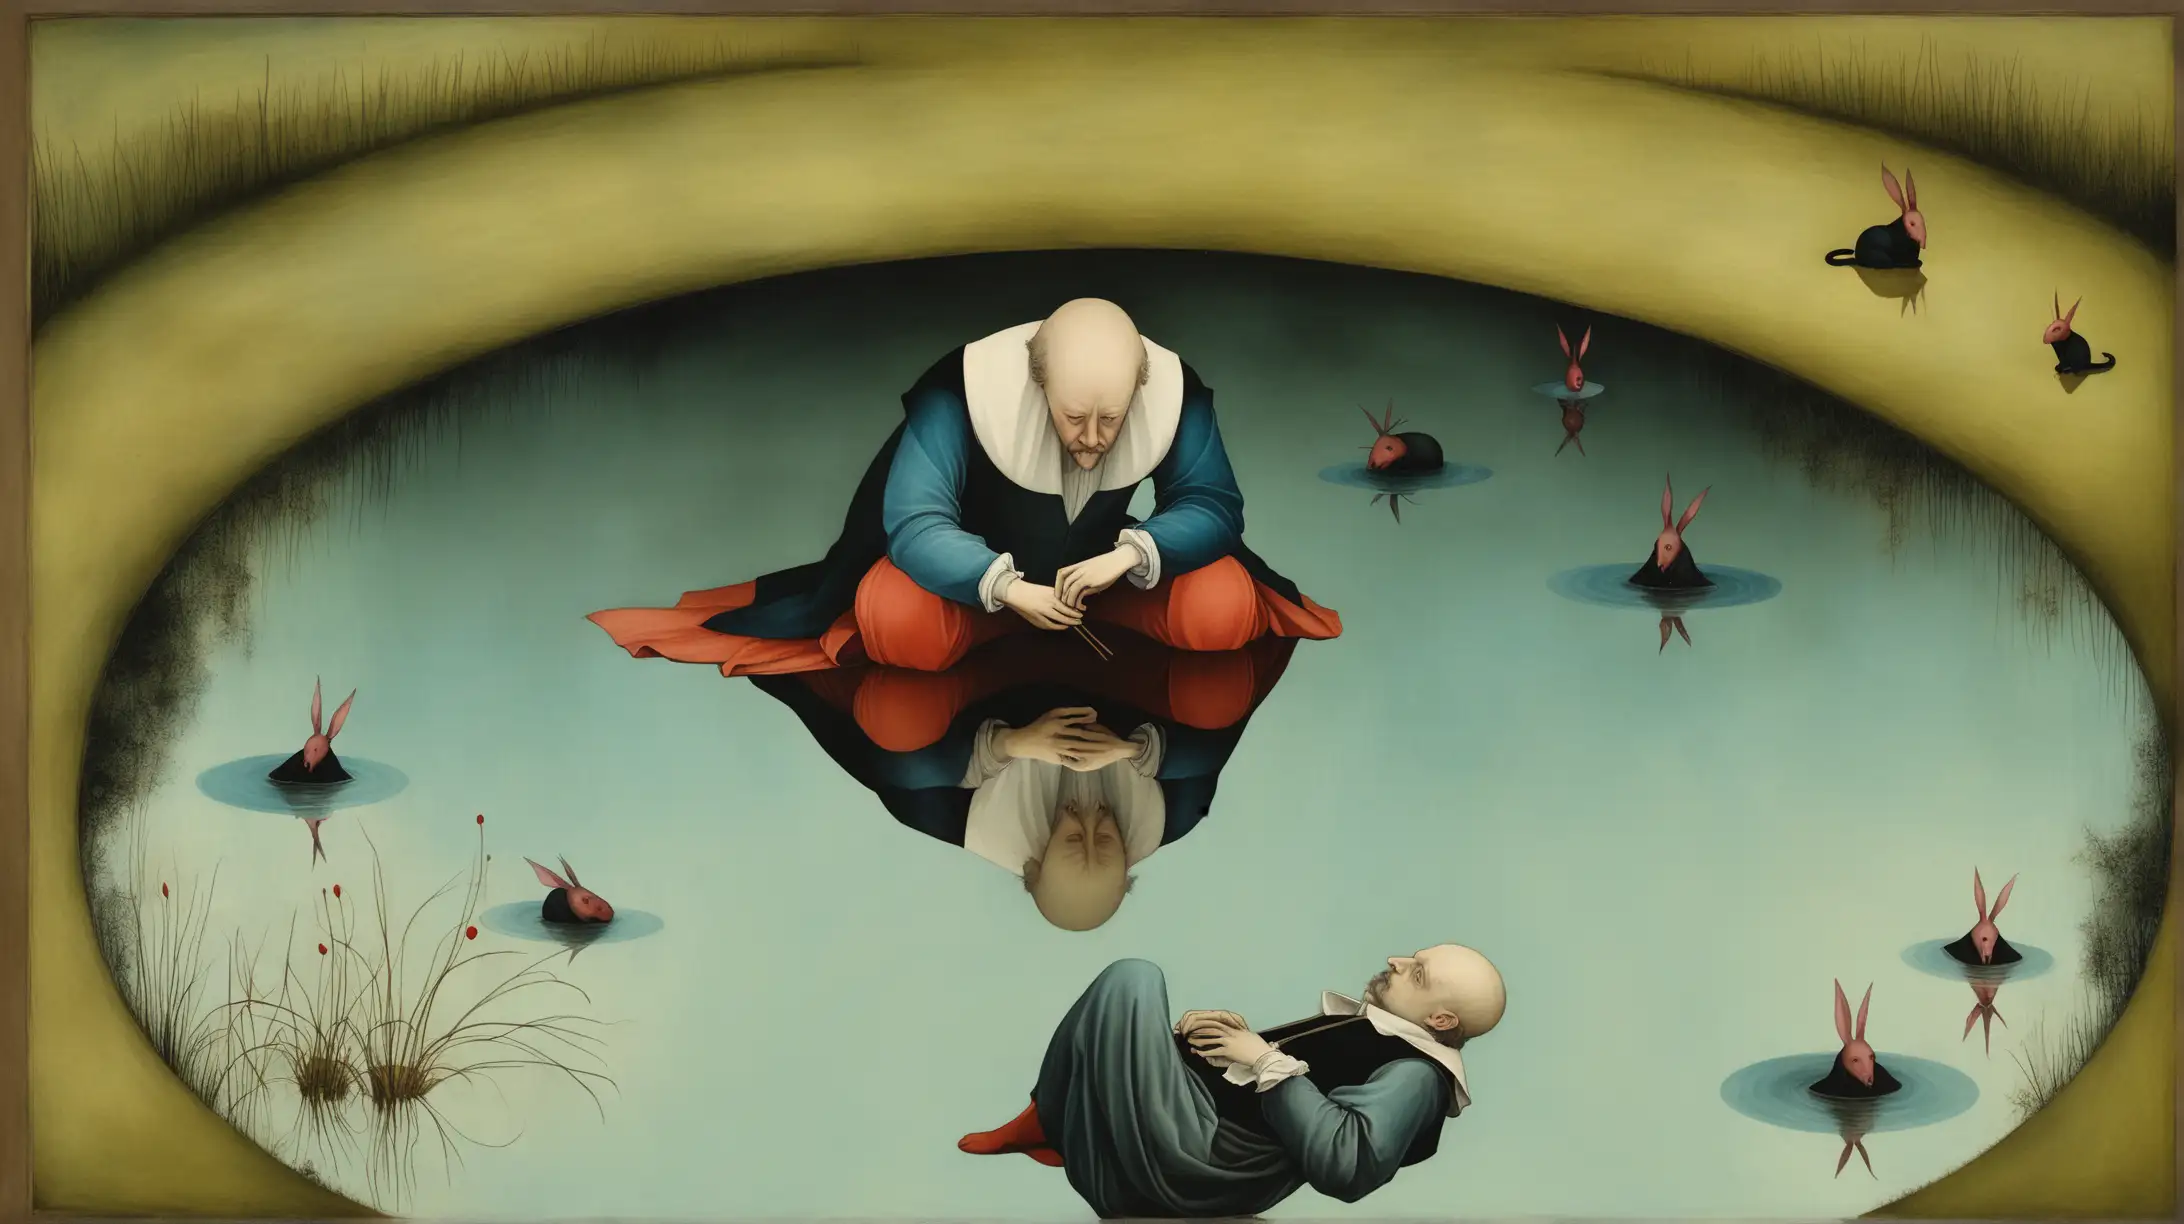 art dealer lean down on his knees reclined gazing at his own reflection in a pool of water. illustrated in the style of Hieronymus Bosch